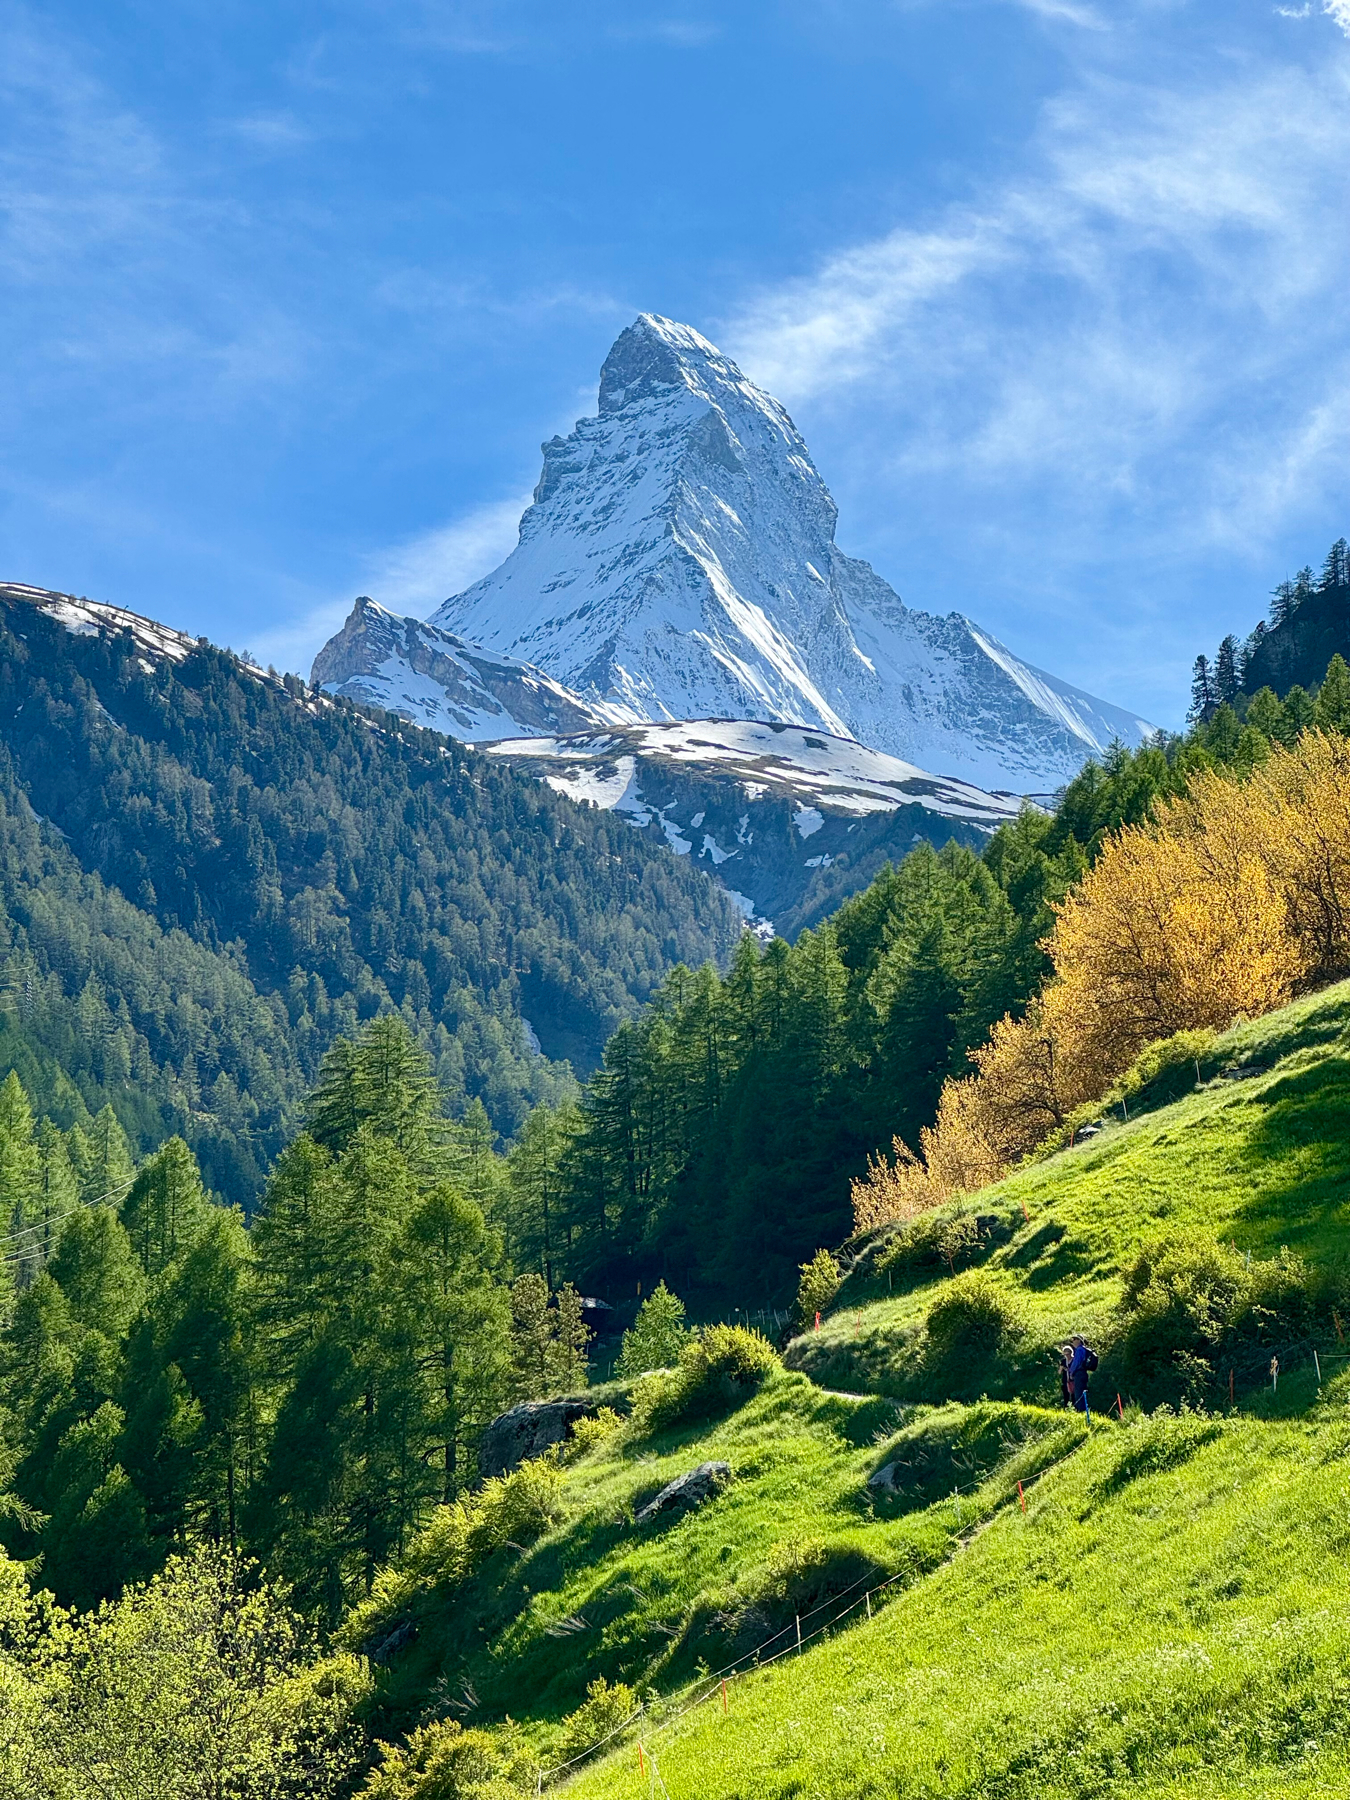 A picturesque mountain landscape showcasing the snow-capped Matterhorn under a clear blue sky. The foreground features lush green hills and a mix of evergreen and deciduous trees.